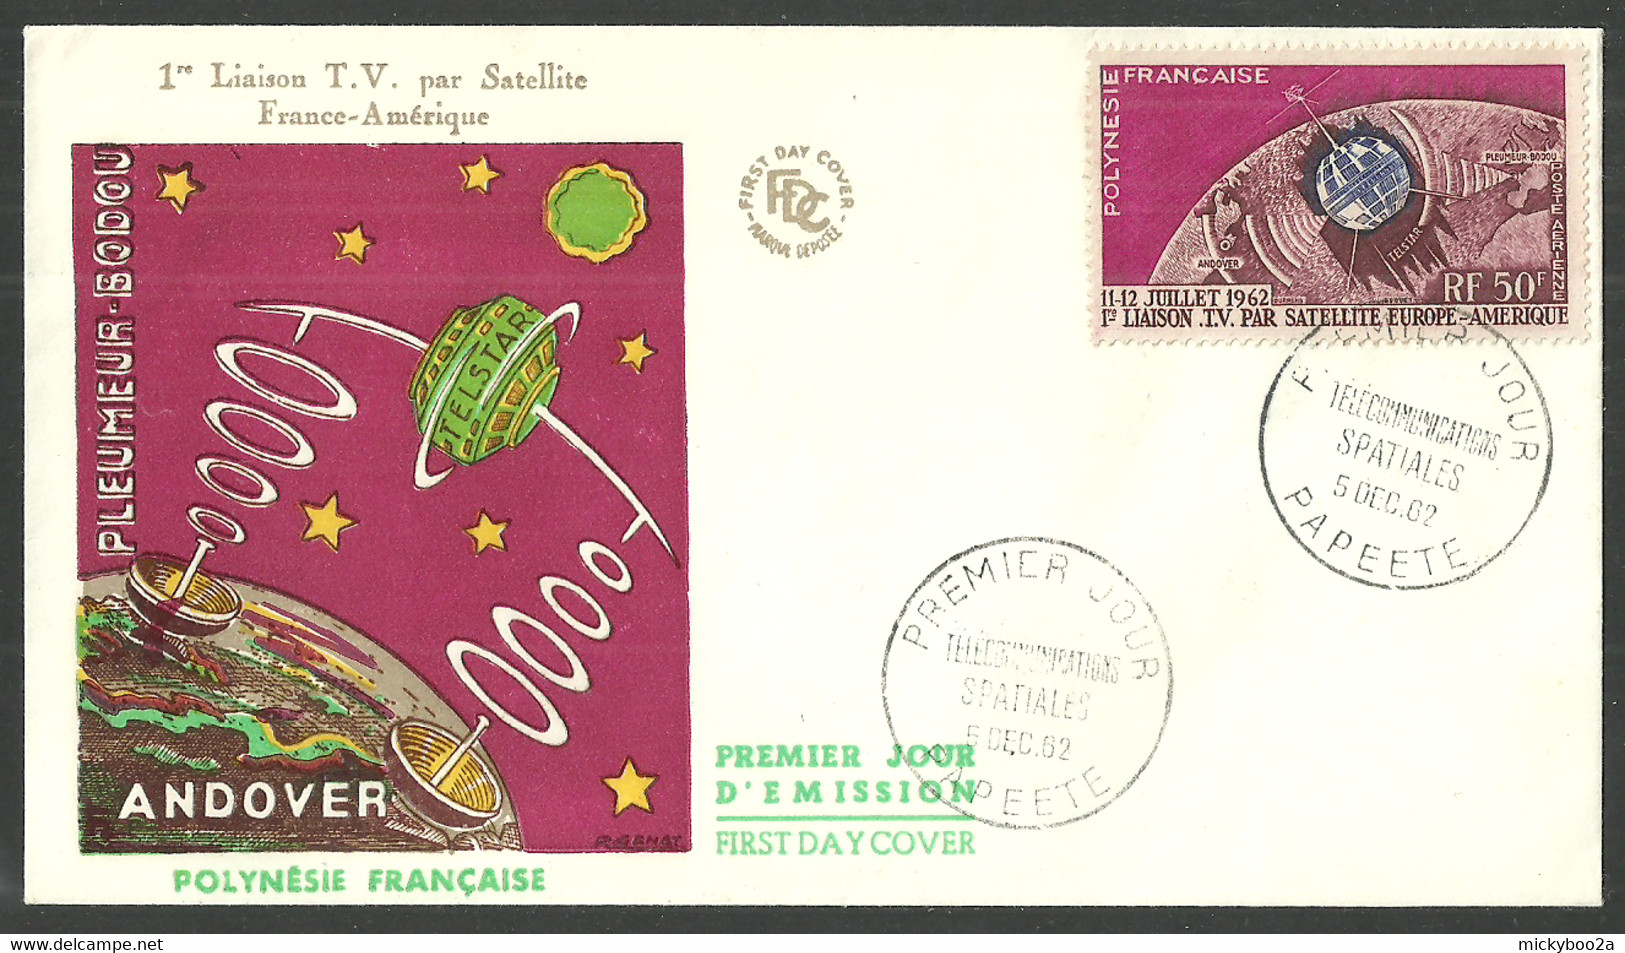 FRENCH POLYNESIA 1962 TELSTAR TV SATELLITE COMMUNICATIONS FIRST DAY COVER FDC - Briefe U. Dokumente